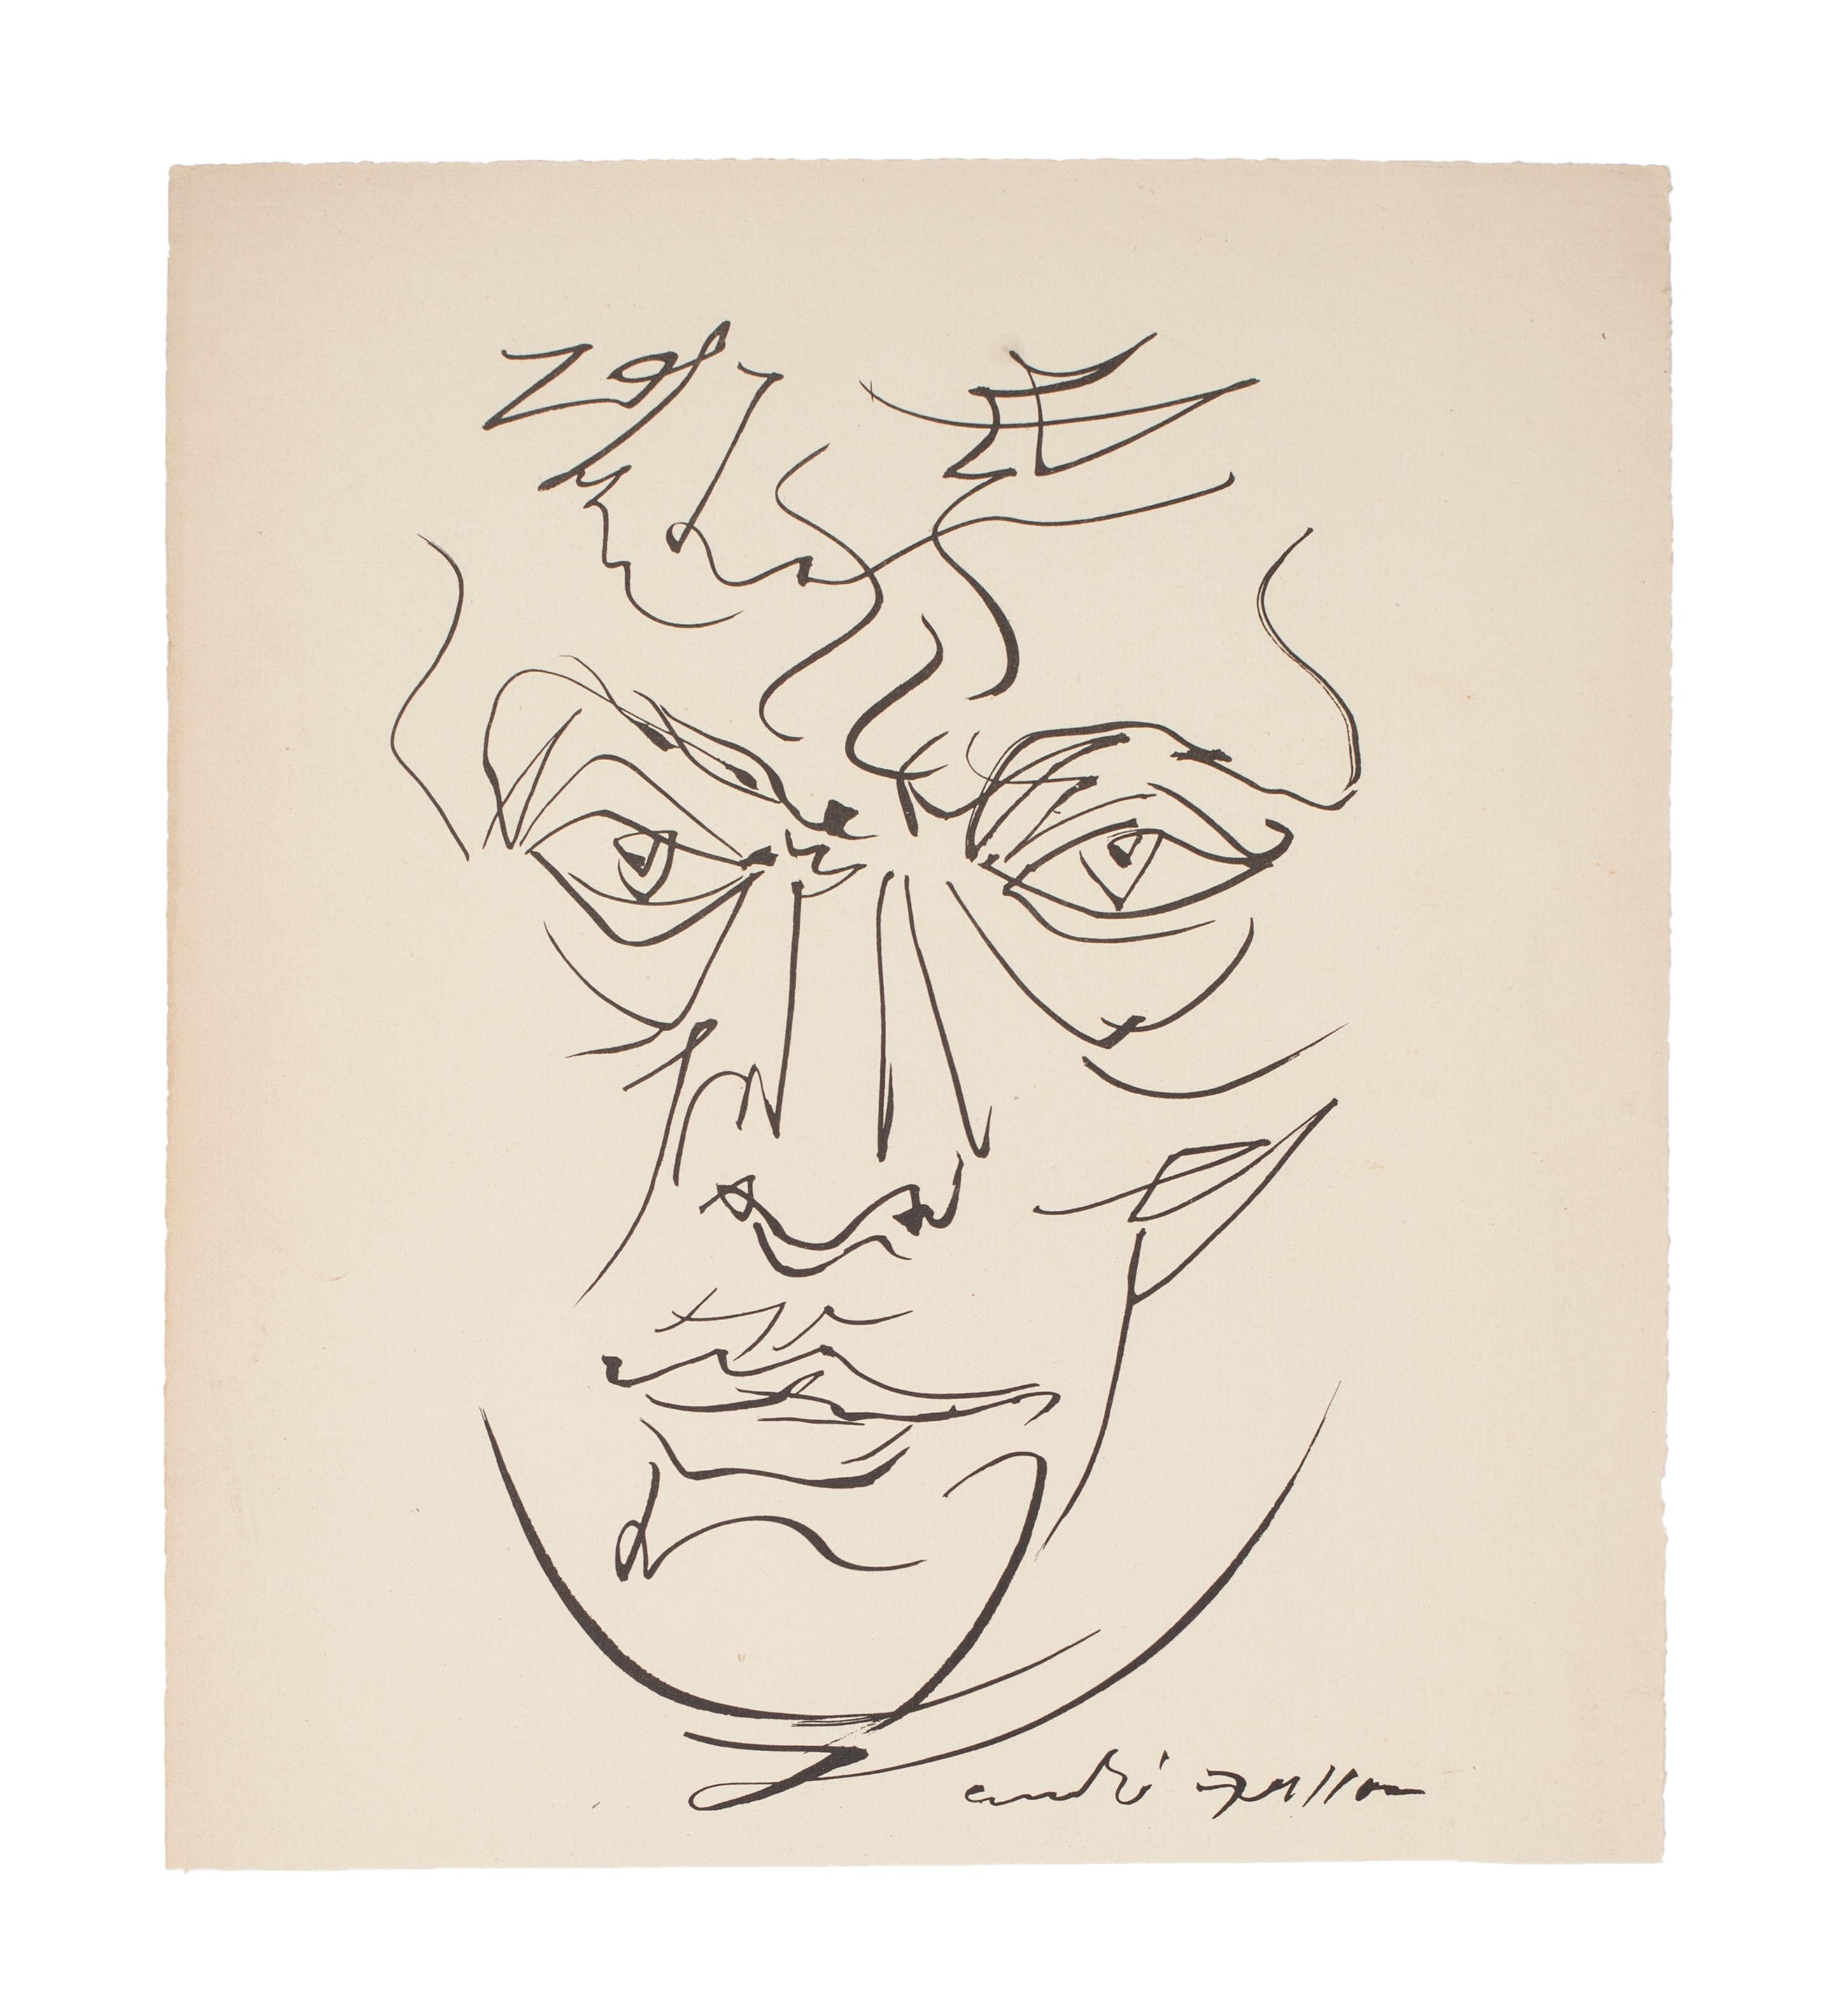 Portrait is an original lithograph realized by André Masson, signed on the plate, edition of 75,  with the stamp of Dynamo Leige (Belgique) edition on the back.

In excellent conditions.

Sheet dimension: 28 x 25 cm.

André Masson (1896-1987) was a